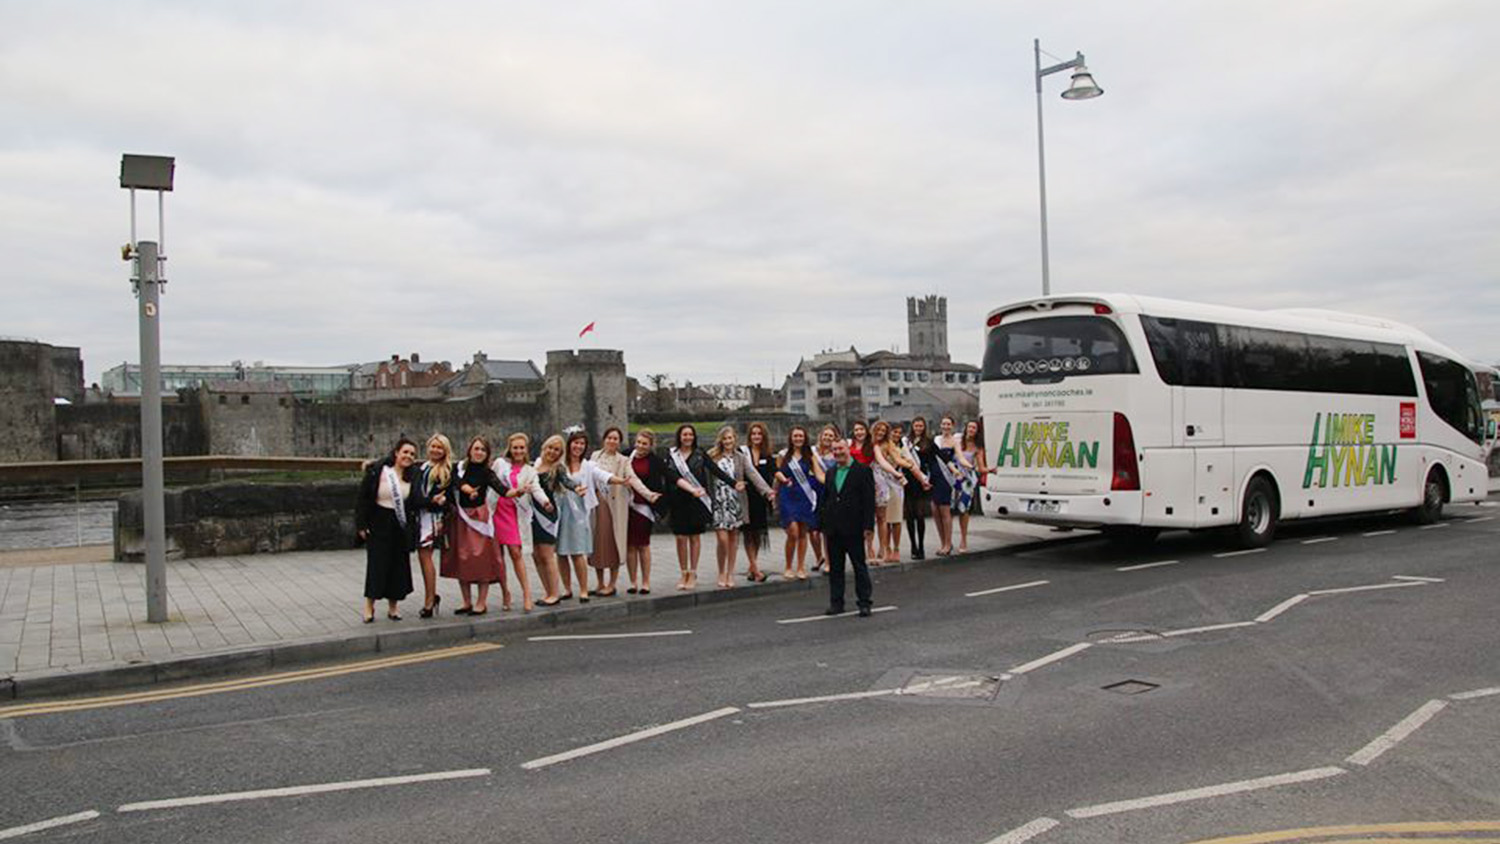 Mike Hynan with hen party in Limerick